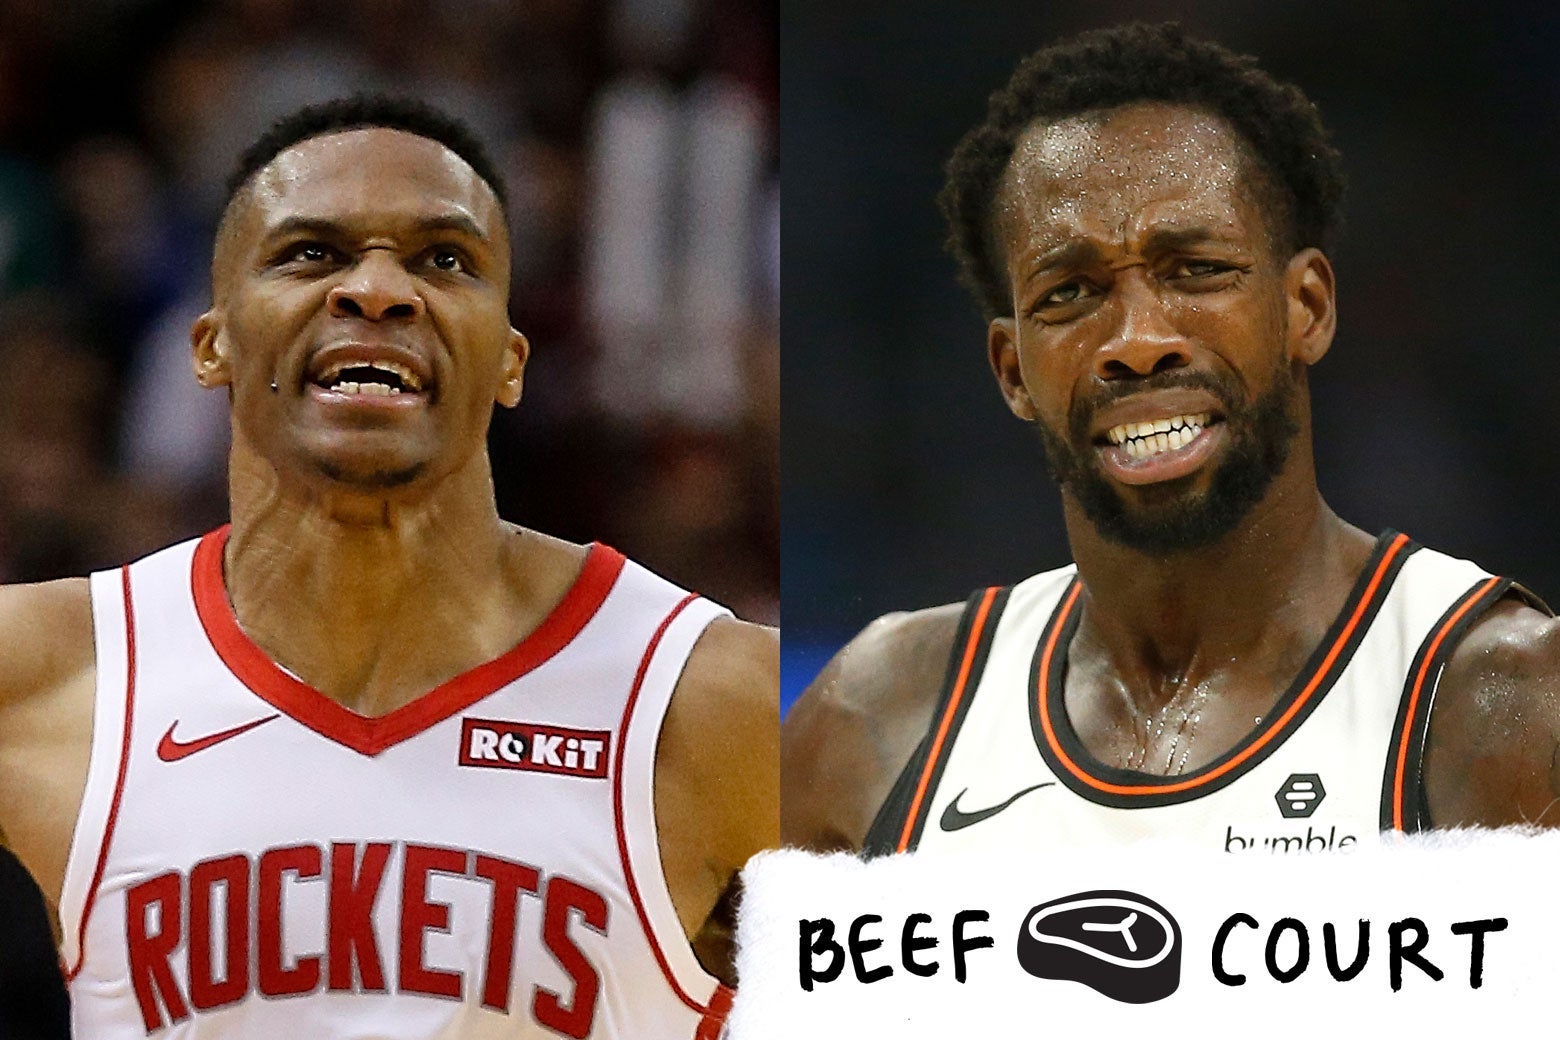 Russell Westbrook and Patrick Beverley